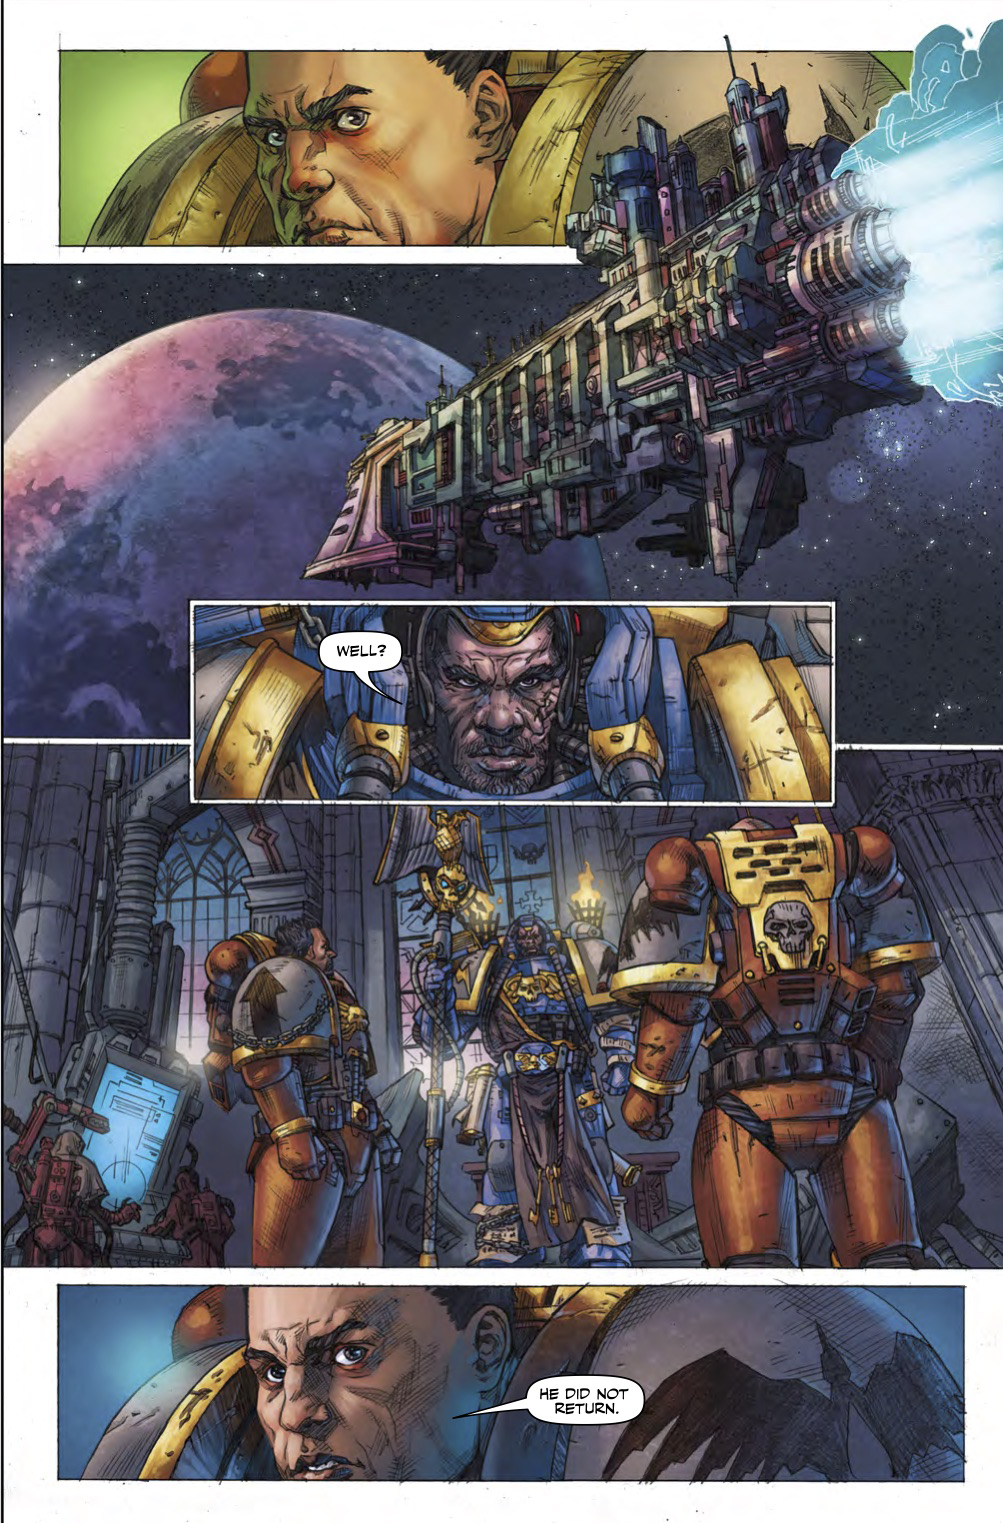 Space-War Is Space-Hell In The New Warhammer 40K: Dawn Of War Comic